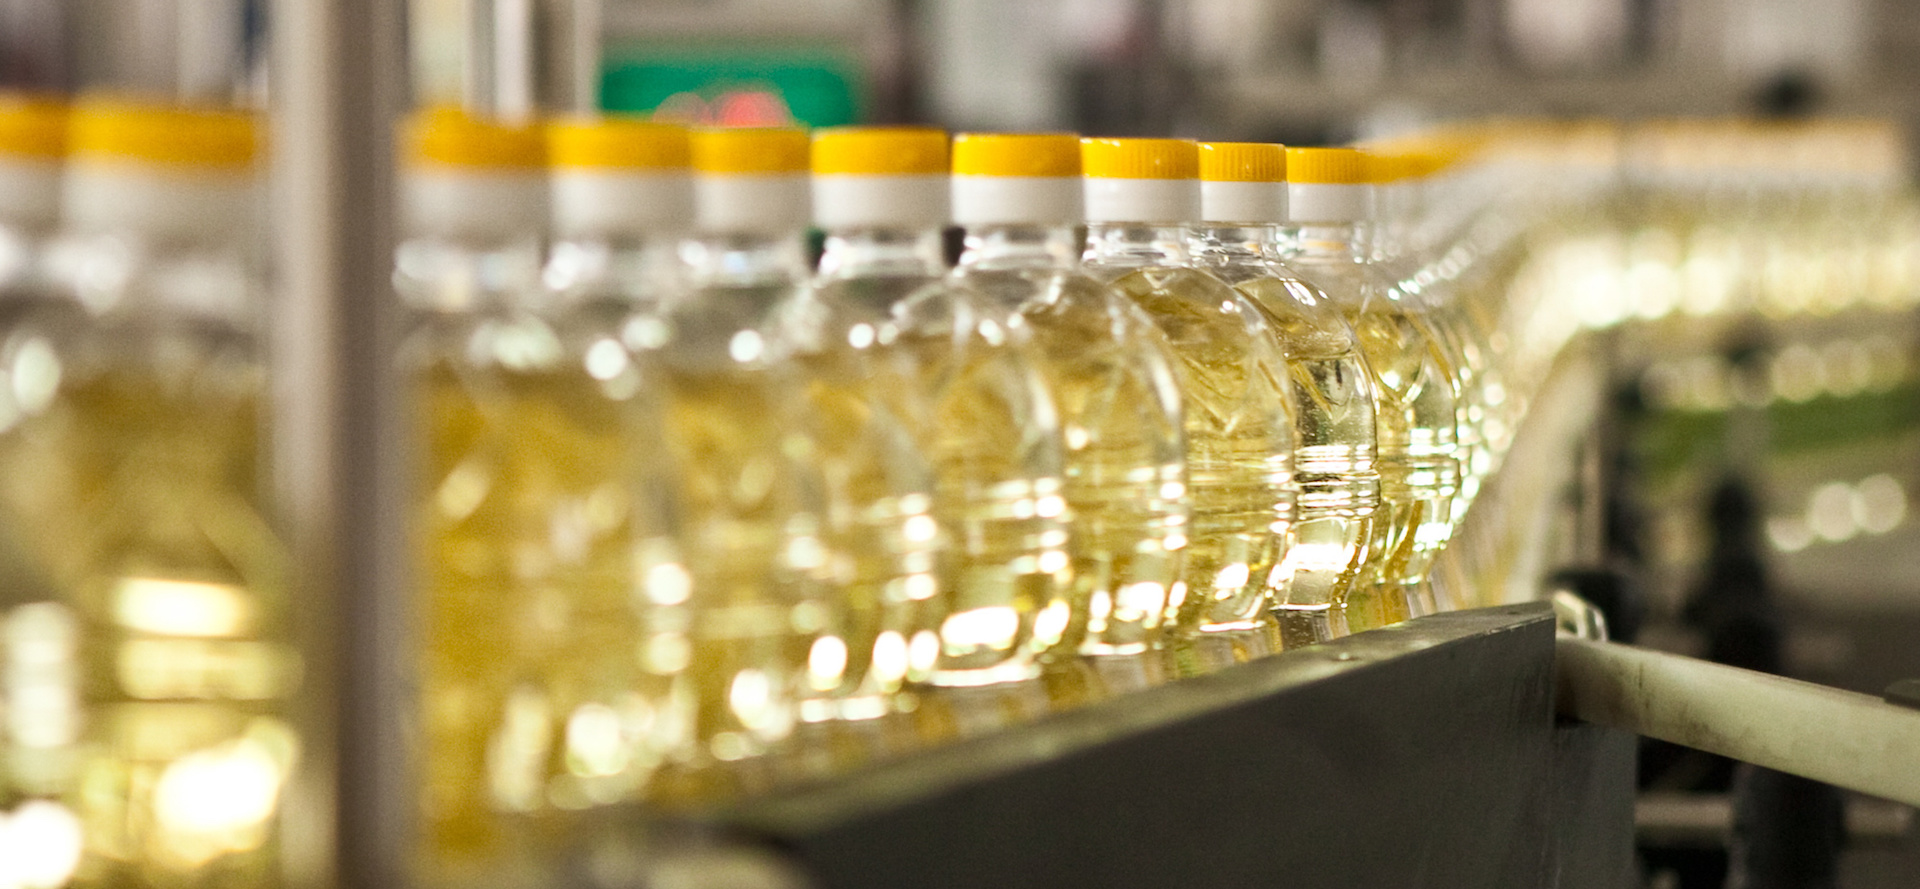 Production of edible oils